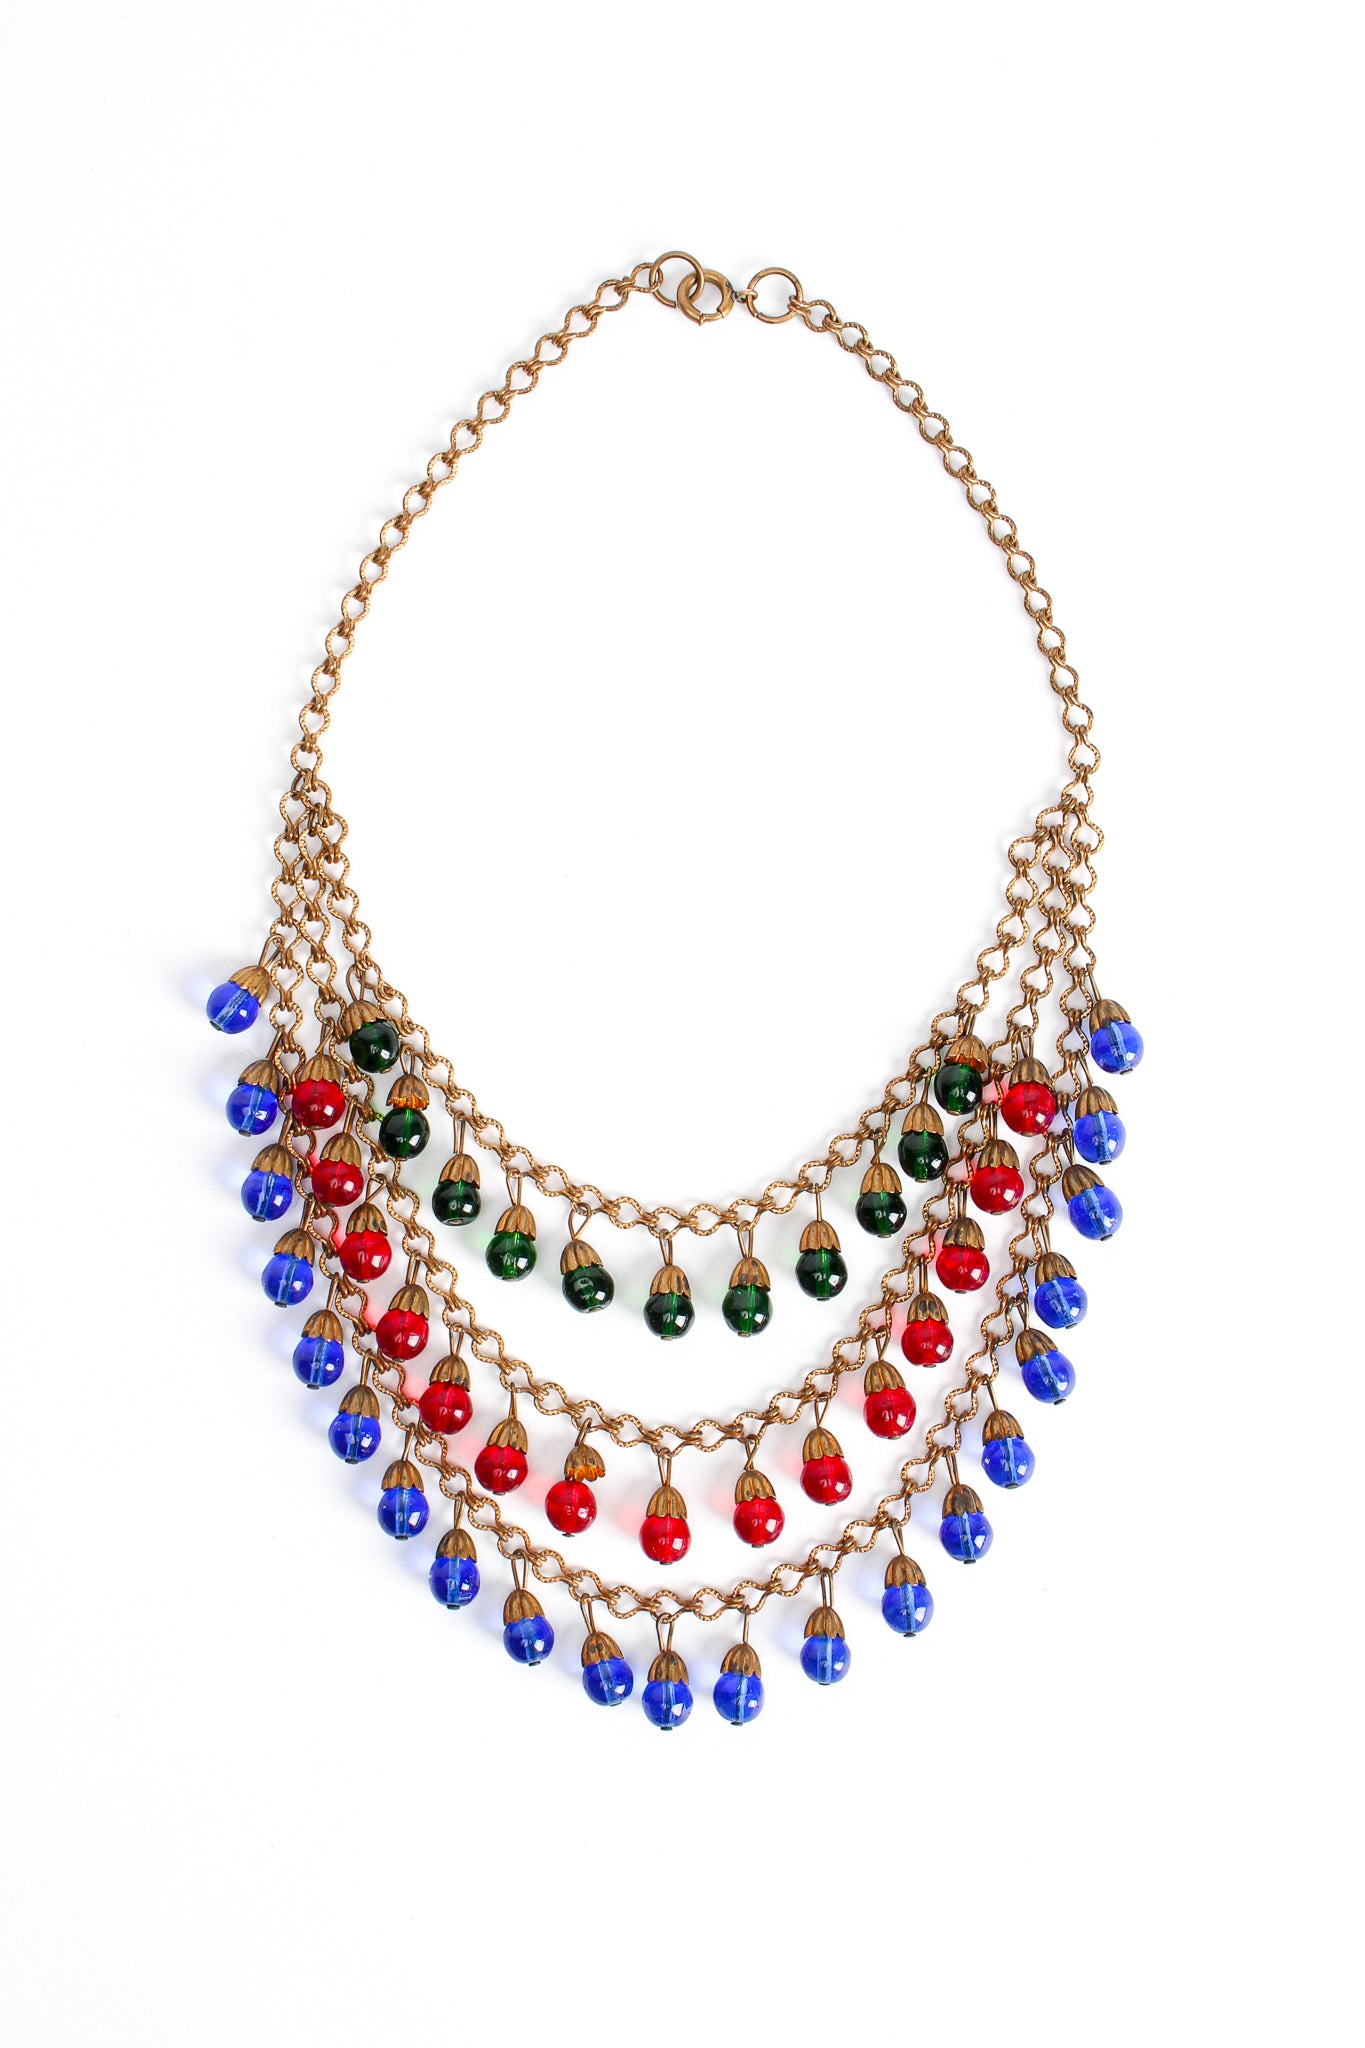 Vintage Tiered Glass Bead Bib Necklace at Recess Los Angeles